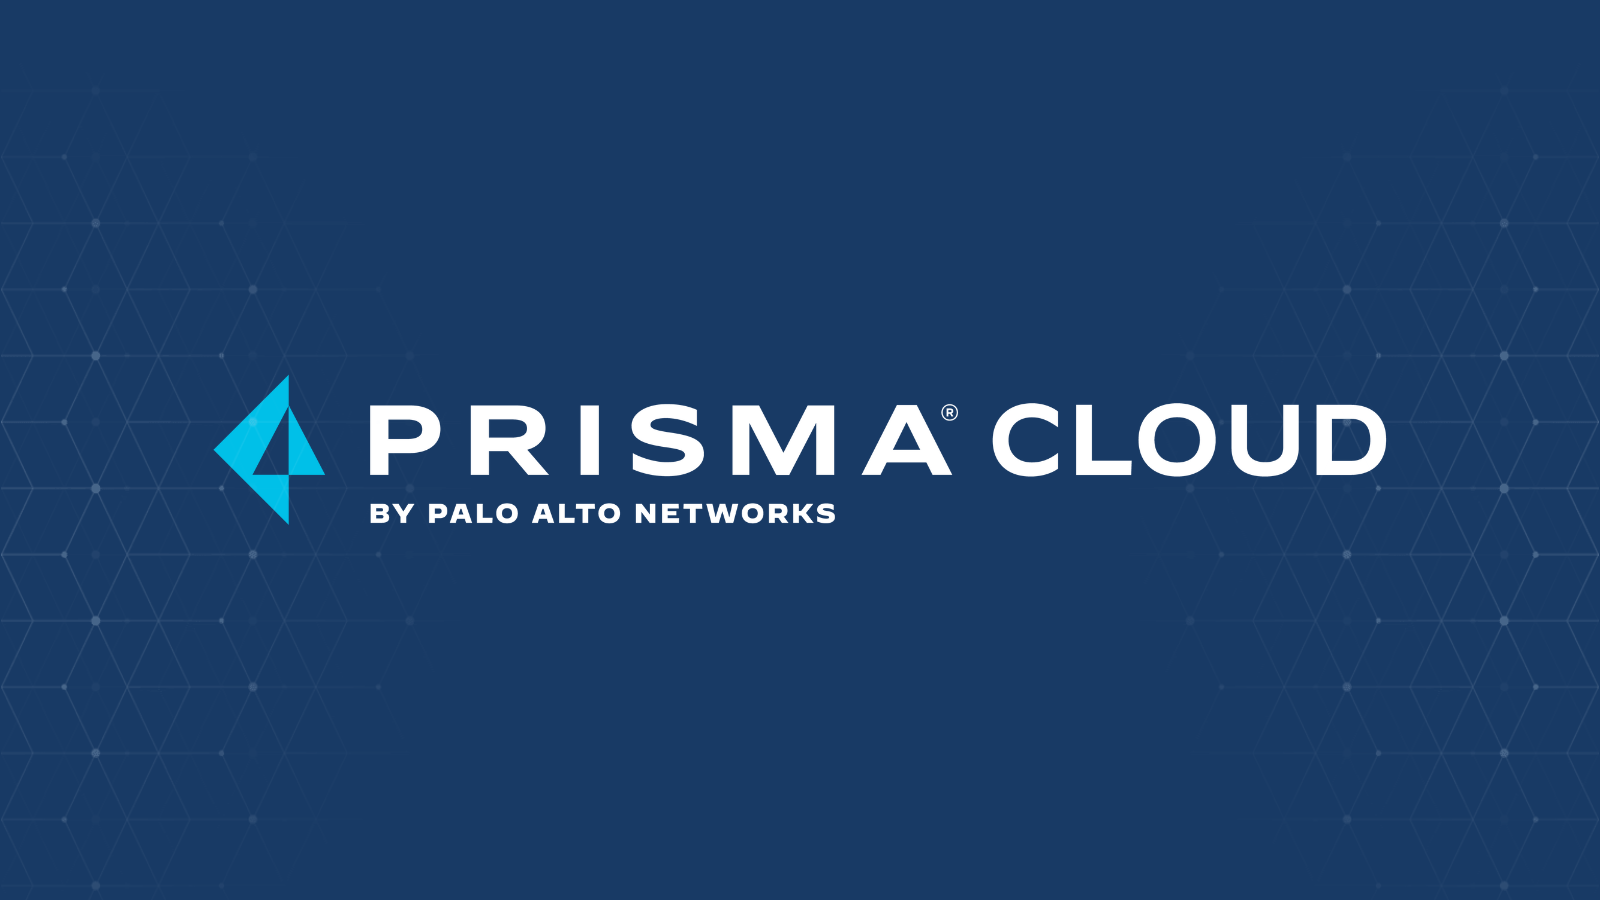 Prisma® Cloud: Securing your Public Sector Data from Code to Cloud